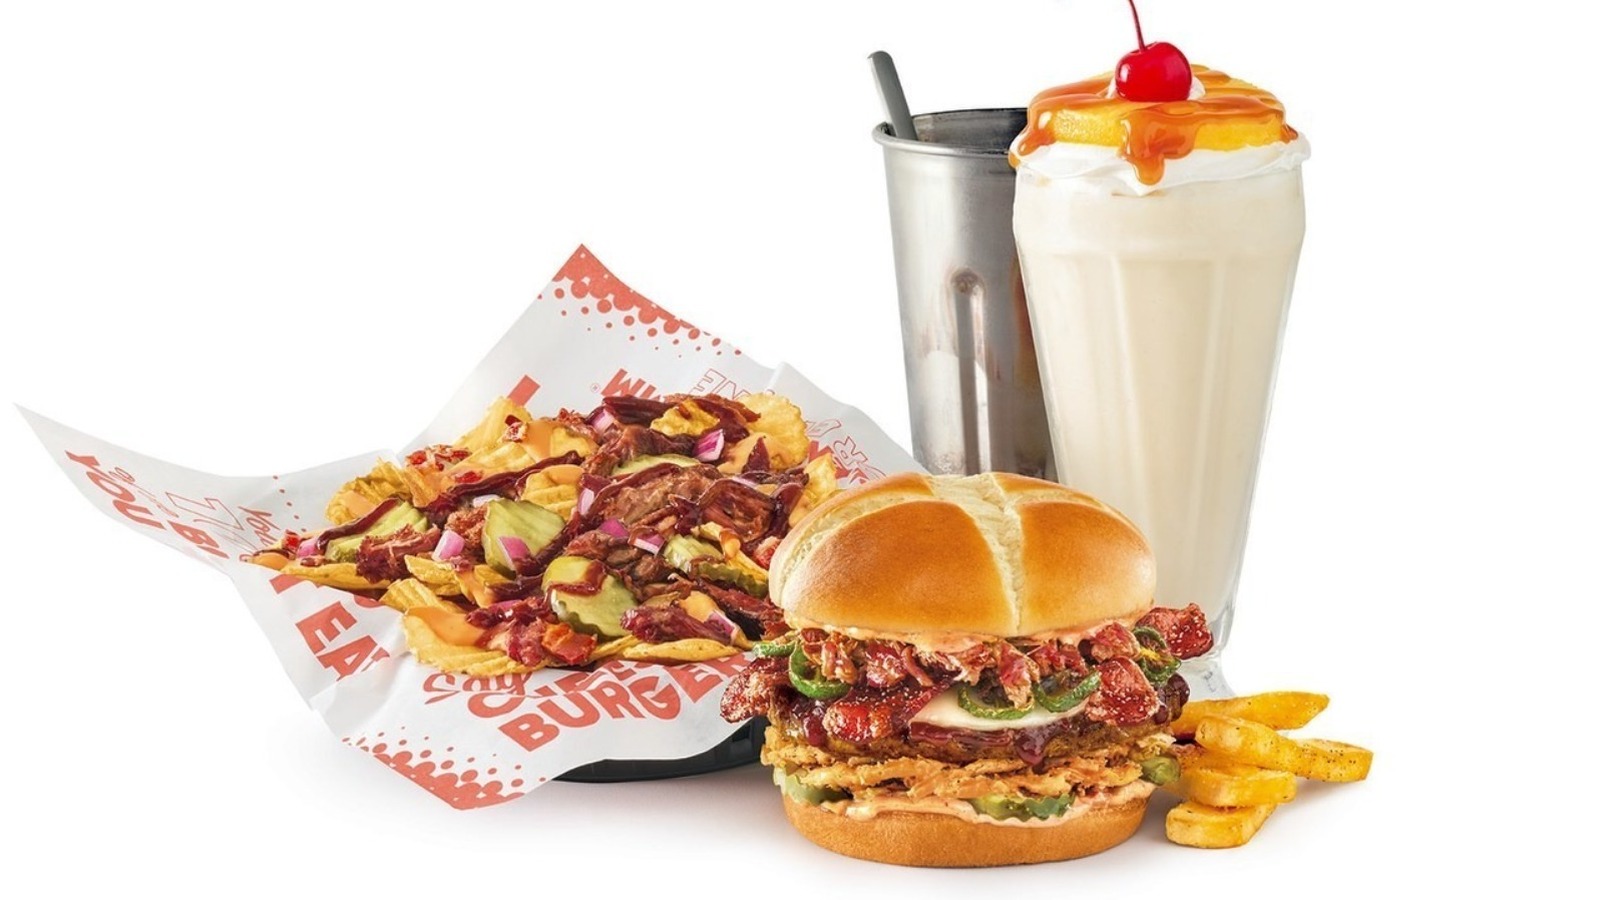 Red Robin's New Menu Features All Things Barbecue